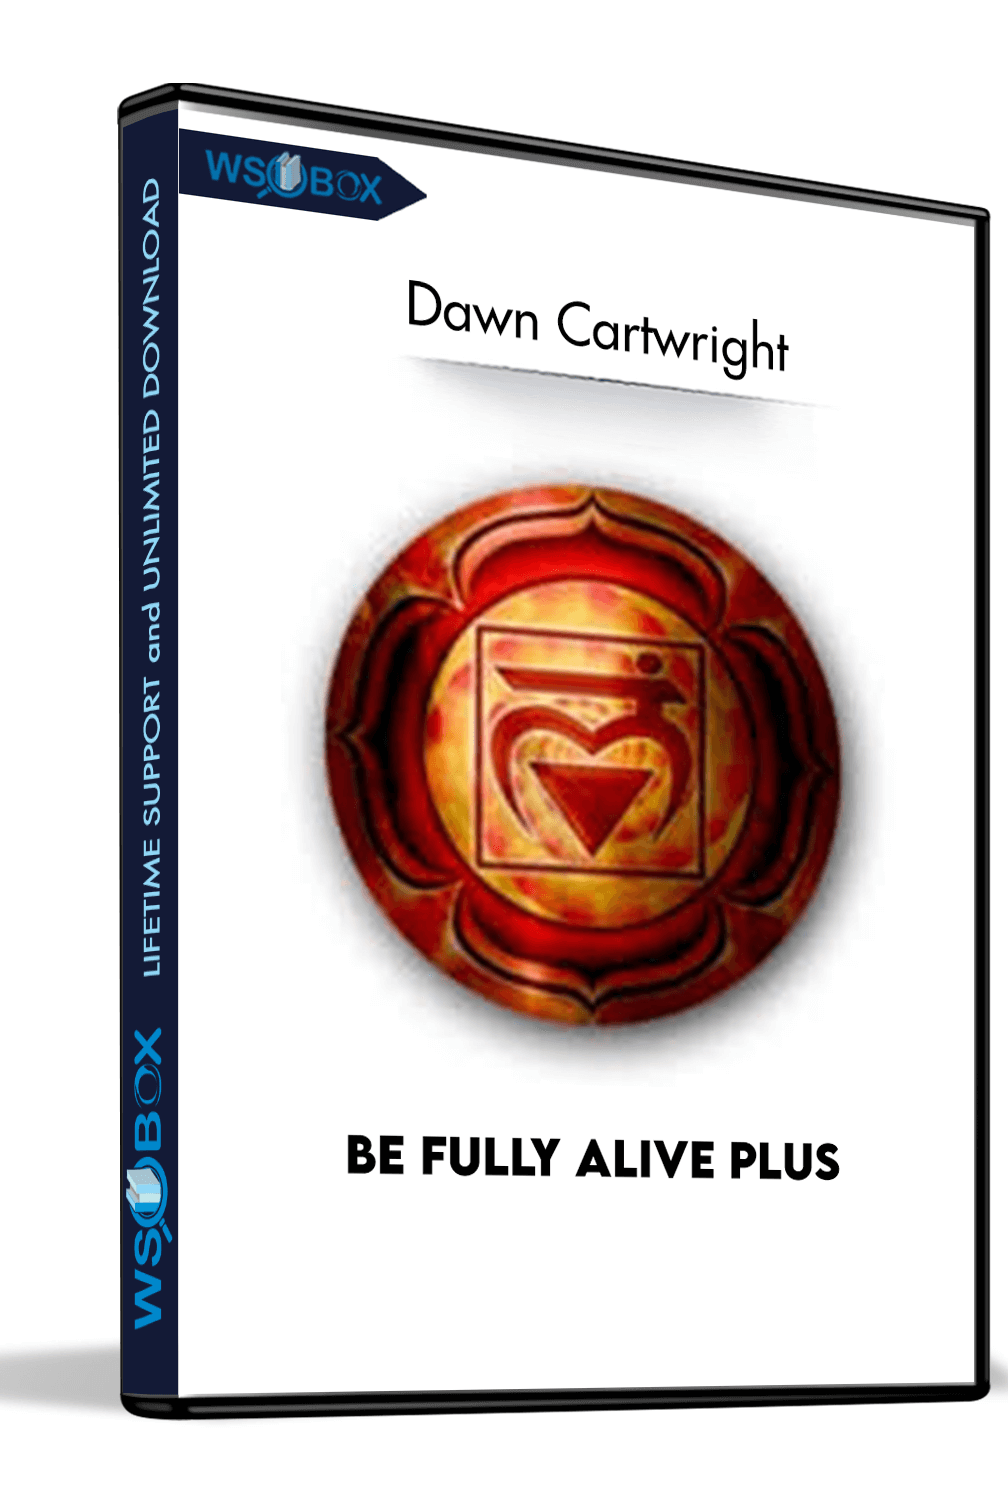 be-fully-alive-plus-dawn-cartwright